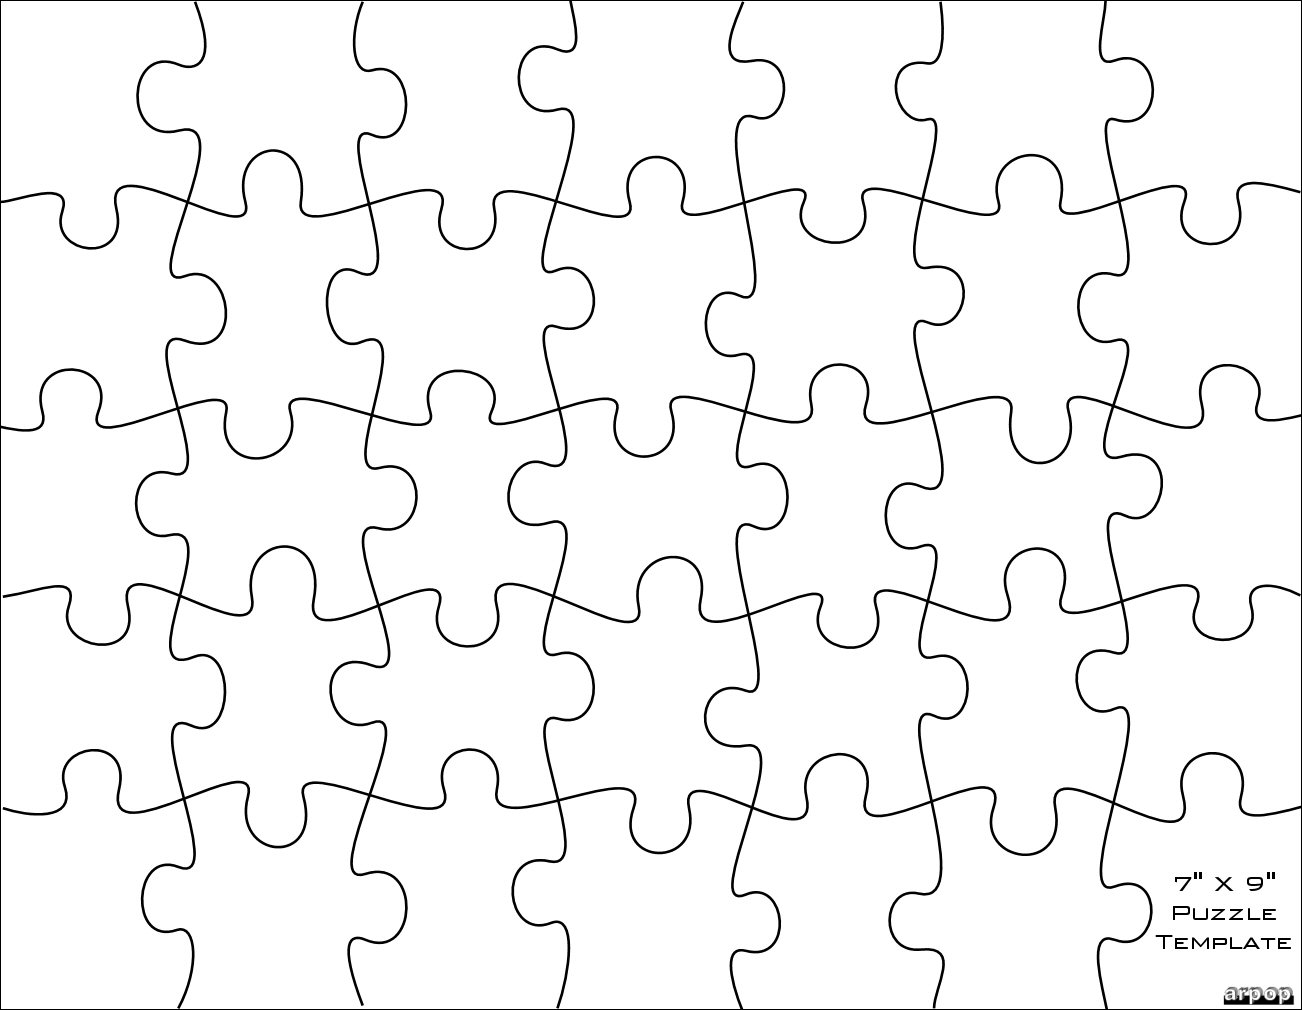 Free Puzzle Template Download Free Puzzle Template Png Images Free Cliparts On Clipart Library